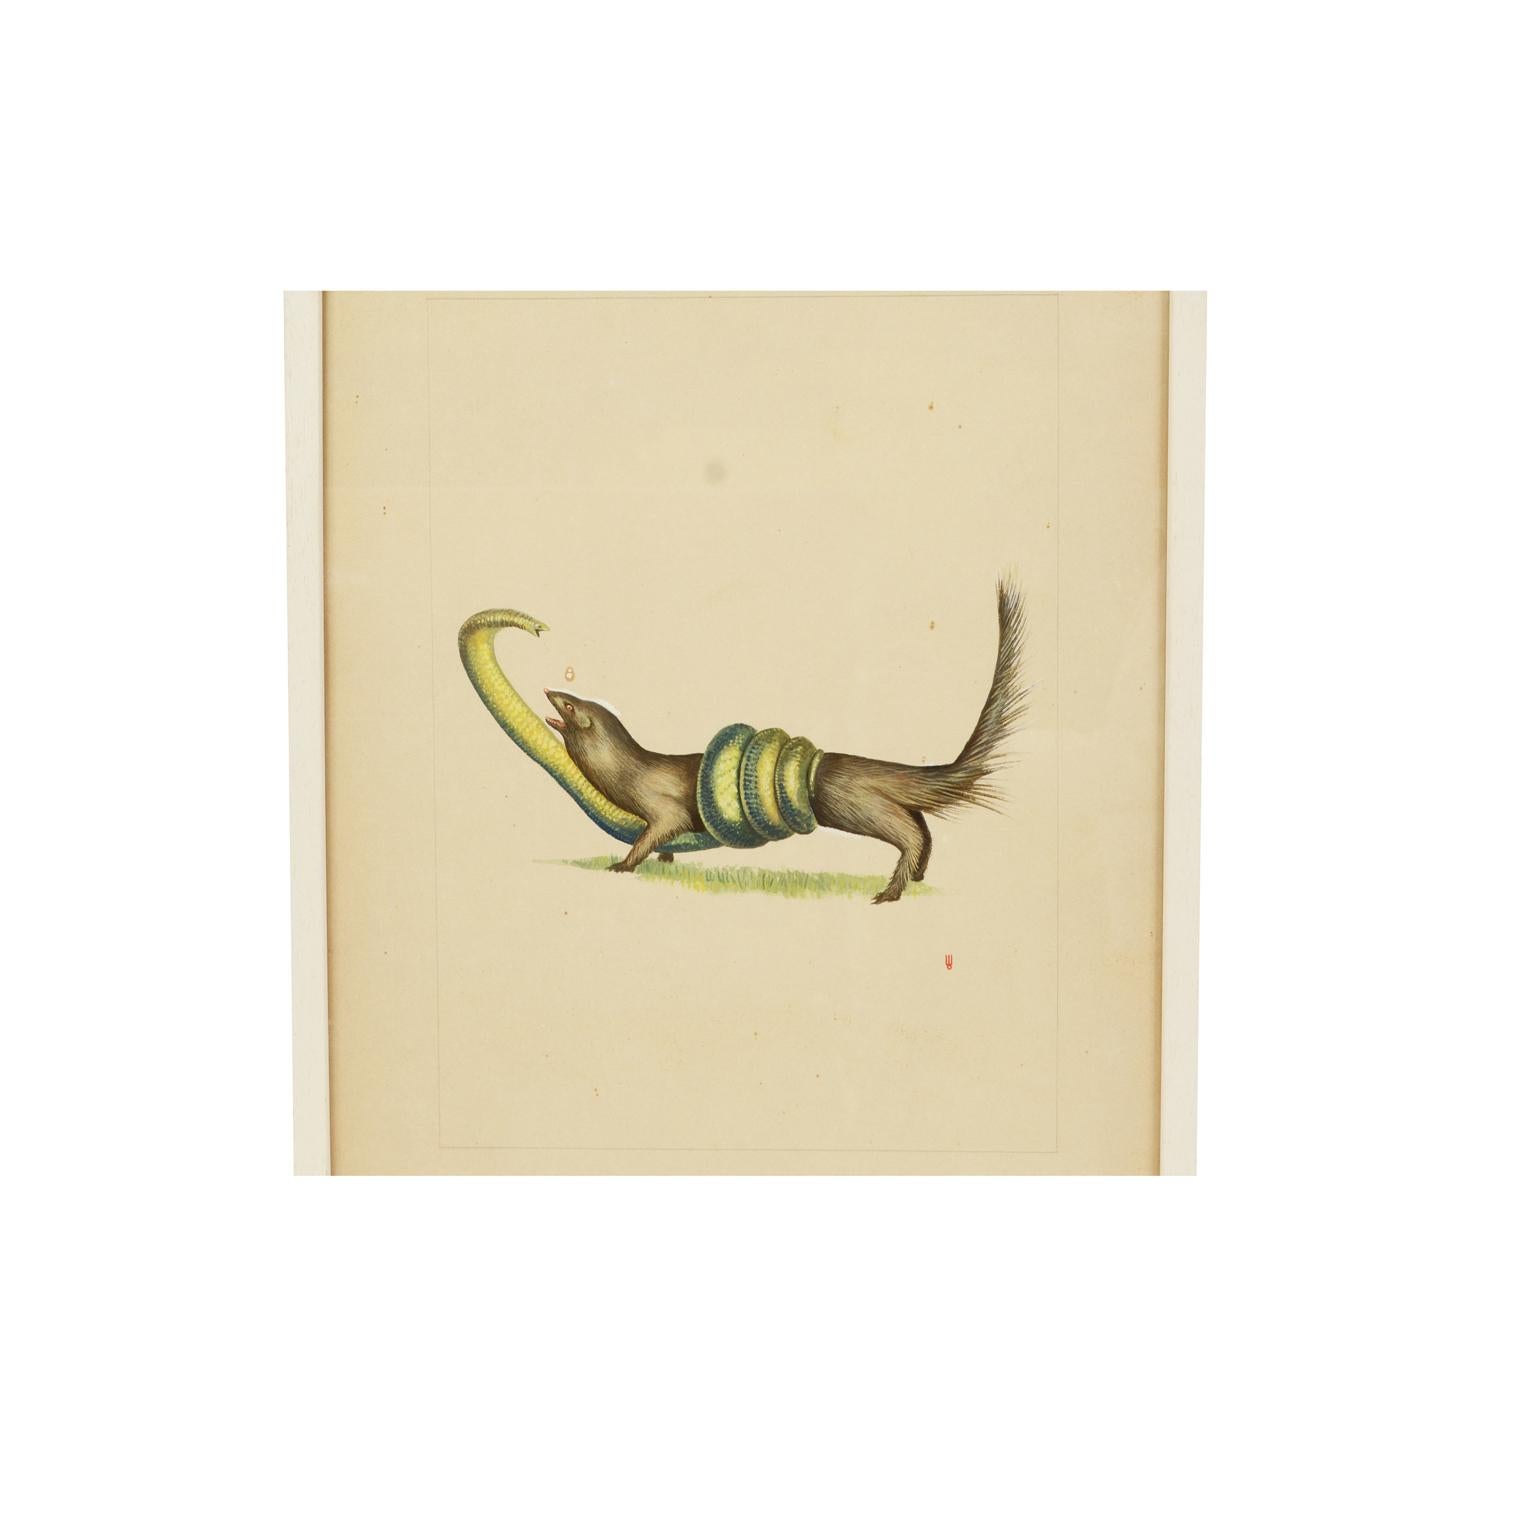 Acrylic colors on paper depicting a weasel attacked by a snake; it is a preparatory sketch commissioned for an animals encyclopedia for children, created and signed by a Korean artist in the 1970s. Very good condition. With frame 49.5 x 67